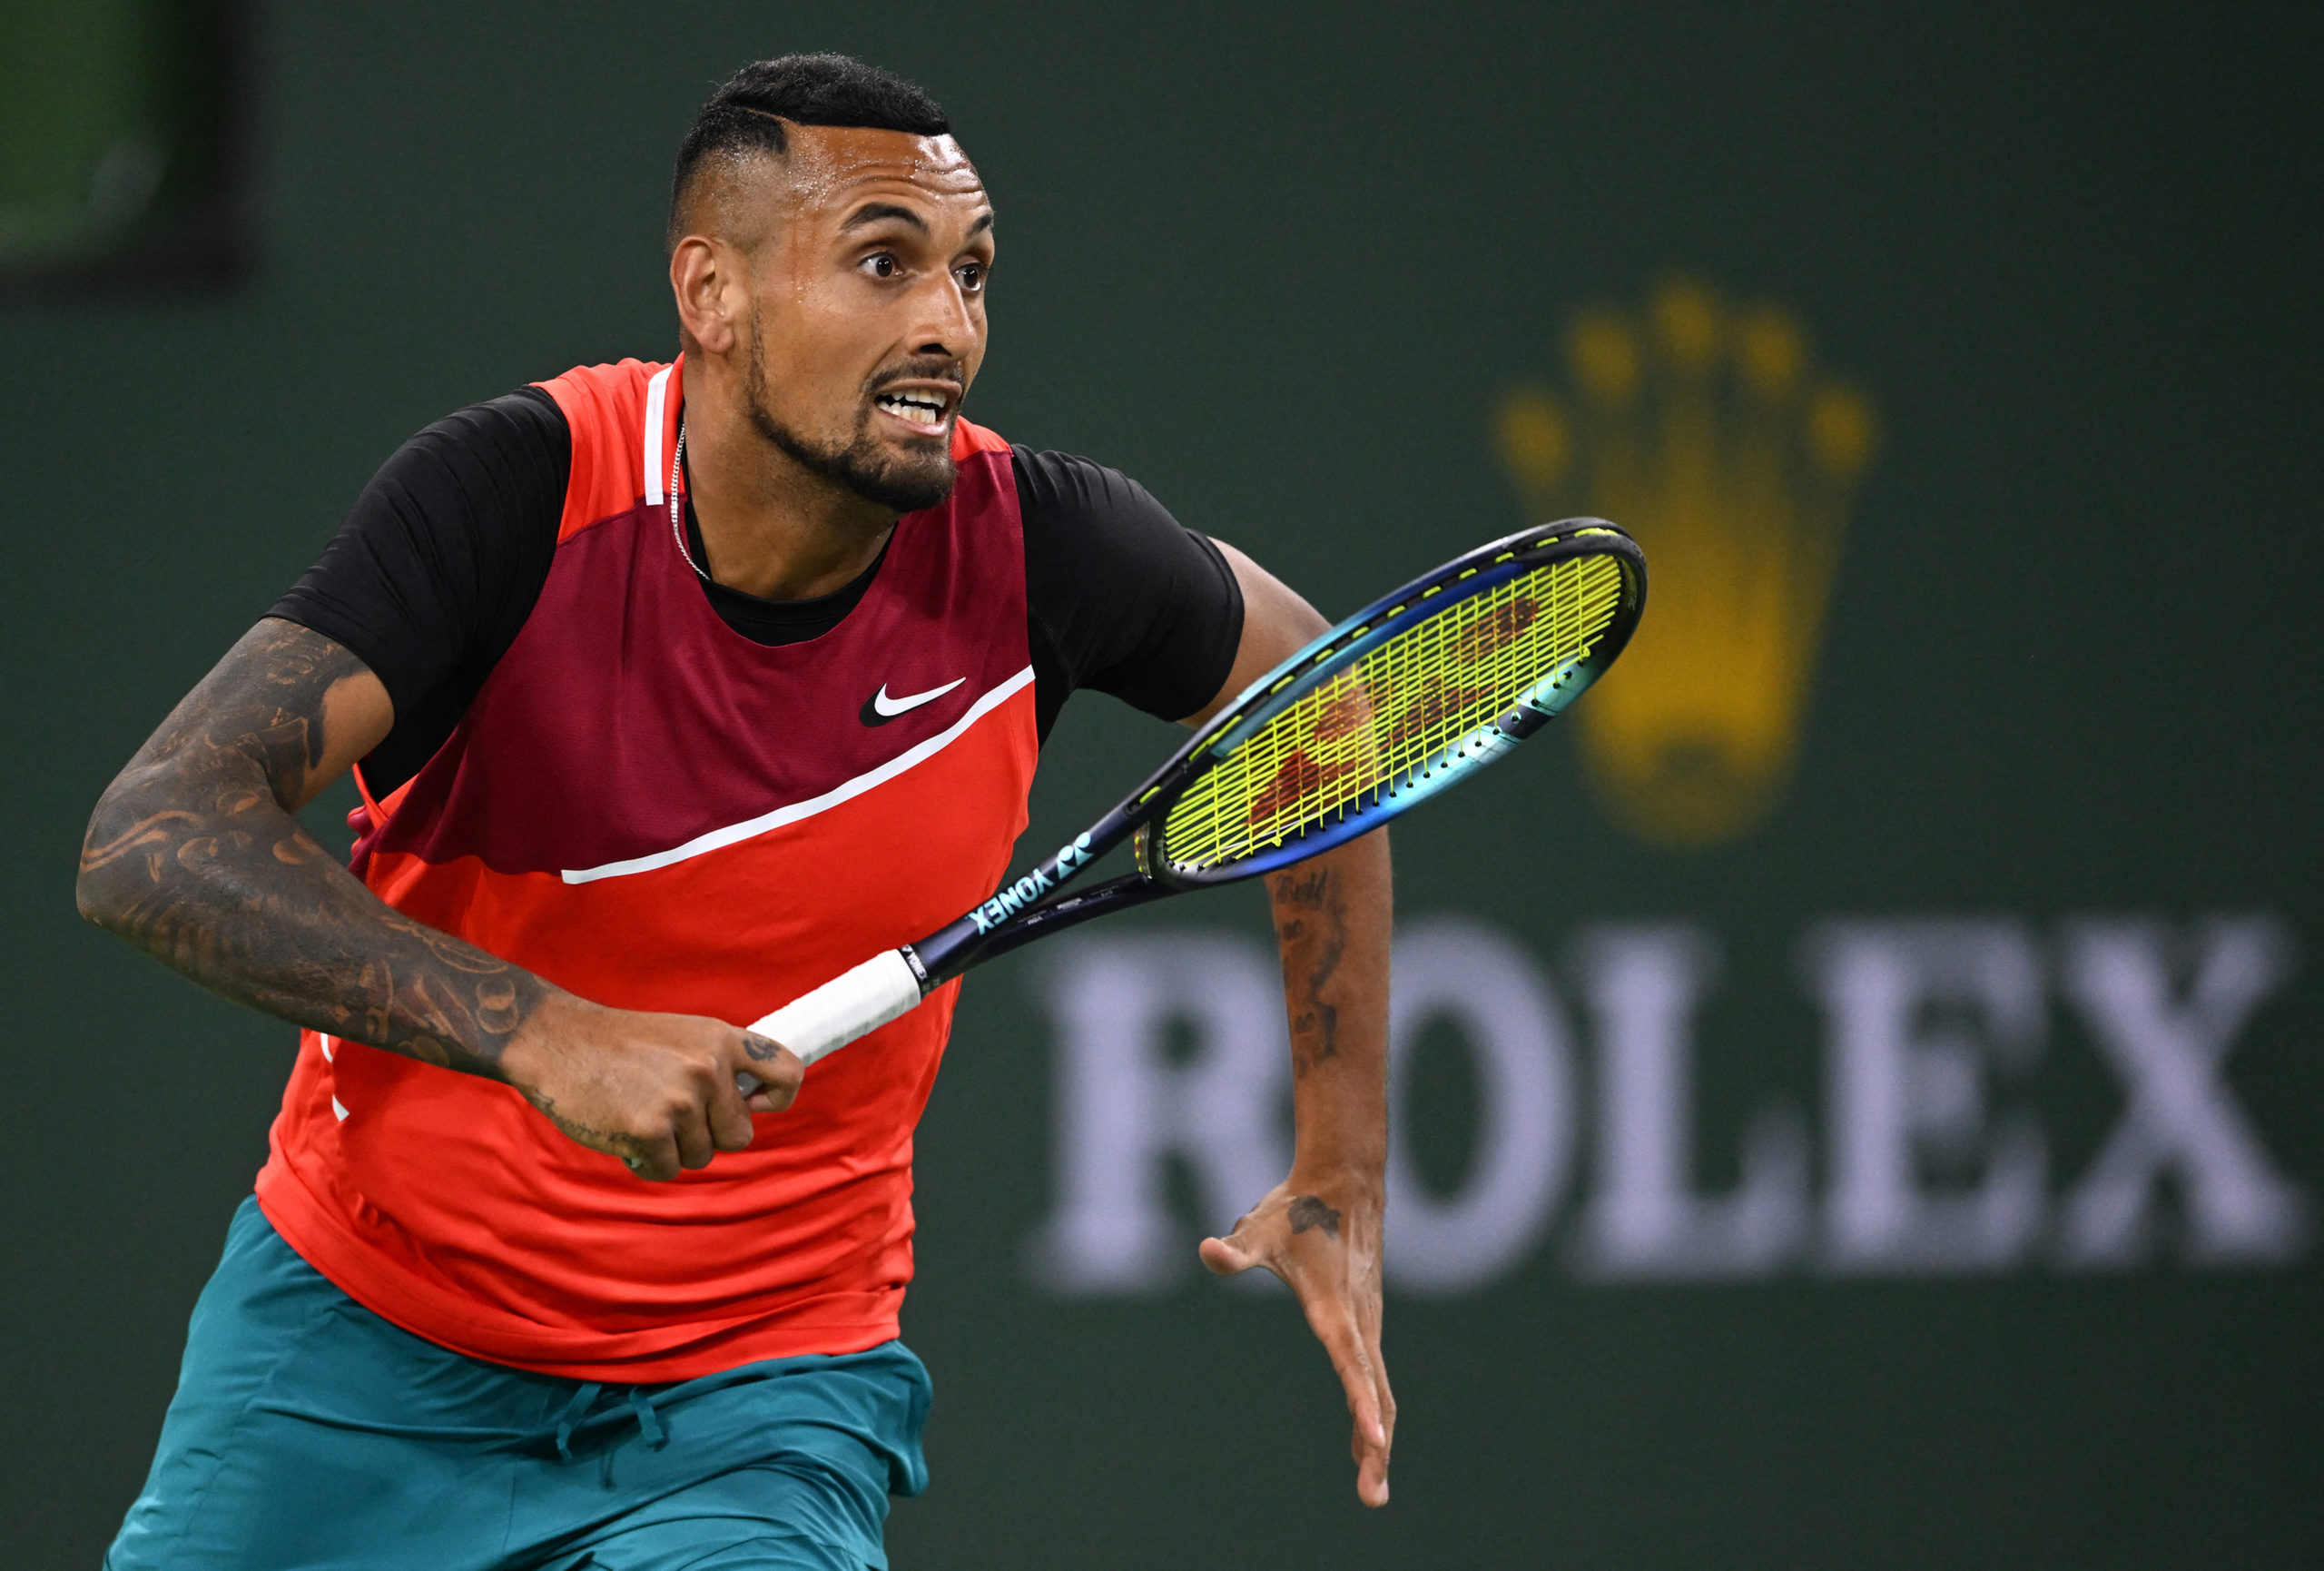  Nick Kyrgios (AUS) hits a shot in his first round match against Sebastian Baez (not pictured) on day 4 at the BNP Paribas Open at the Indian Wells Tennis Garden. 